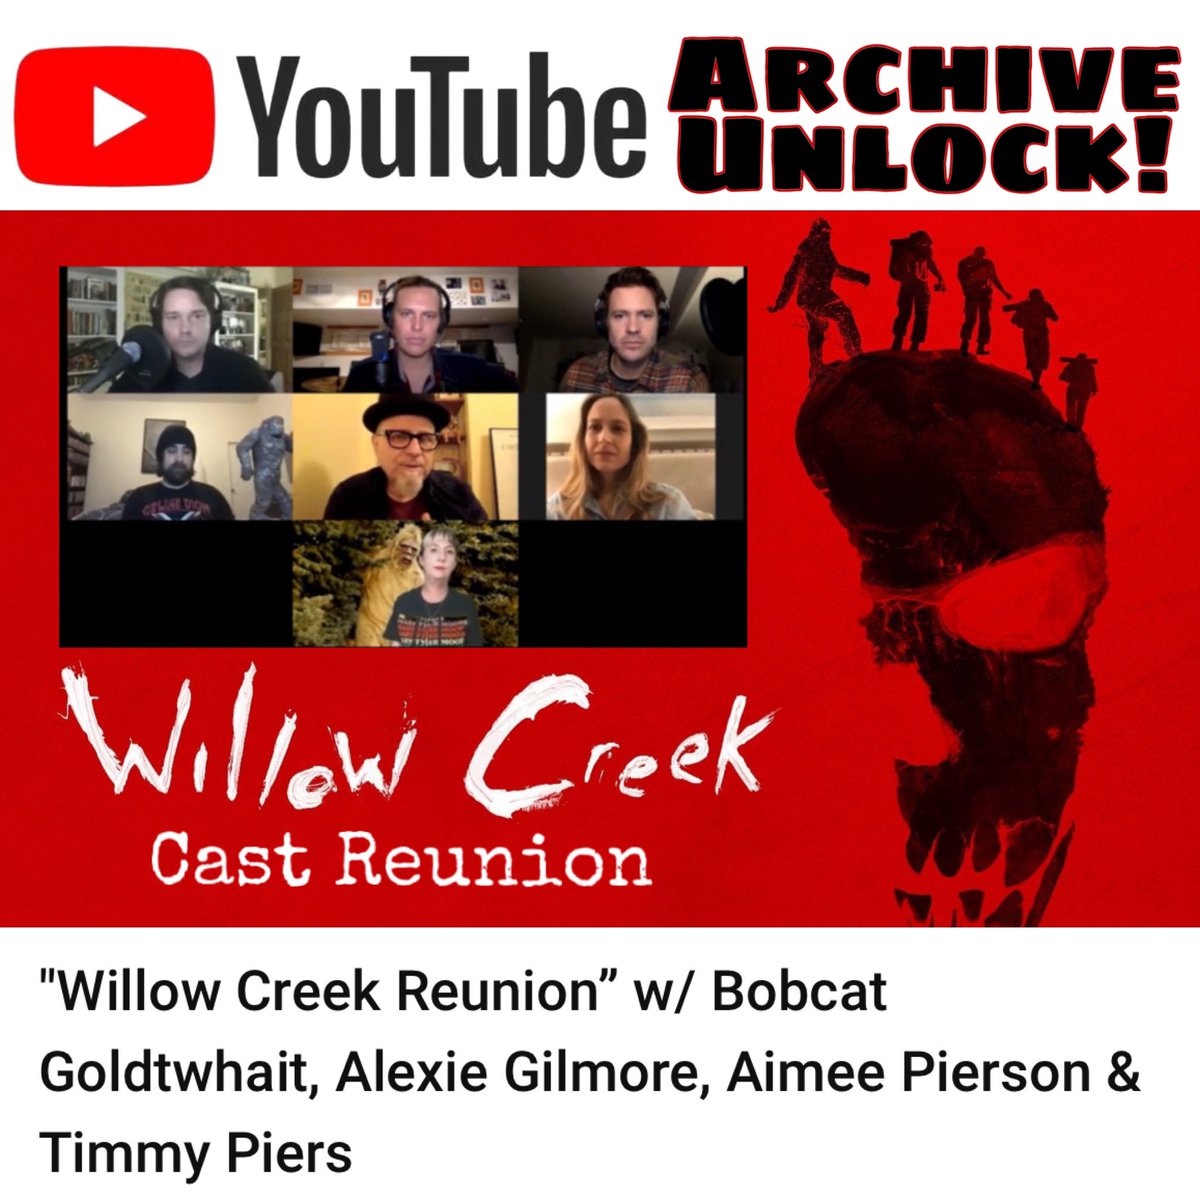 Willow Creek cast reunion available now on our YouTube channel! m.youtube.com/watch?v=lJBk-g… @BryceOJohnson